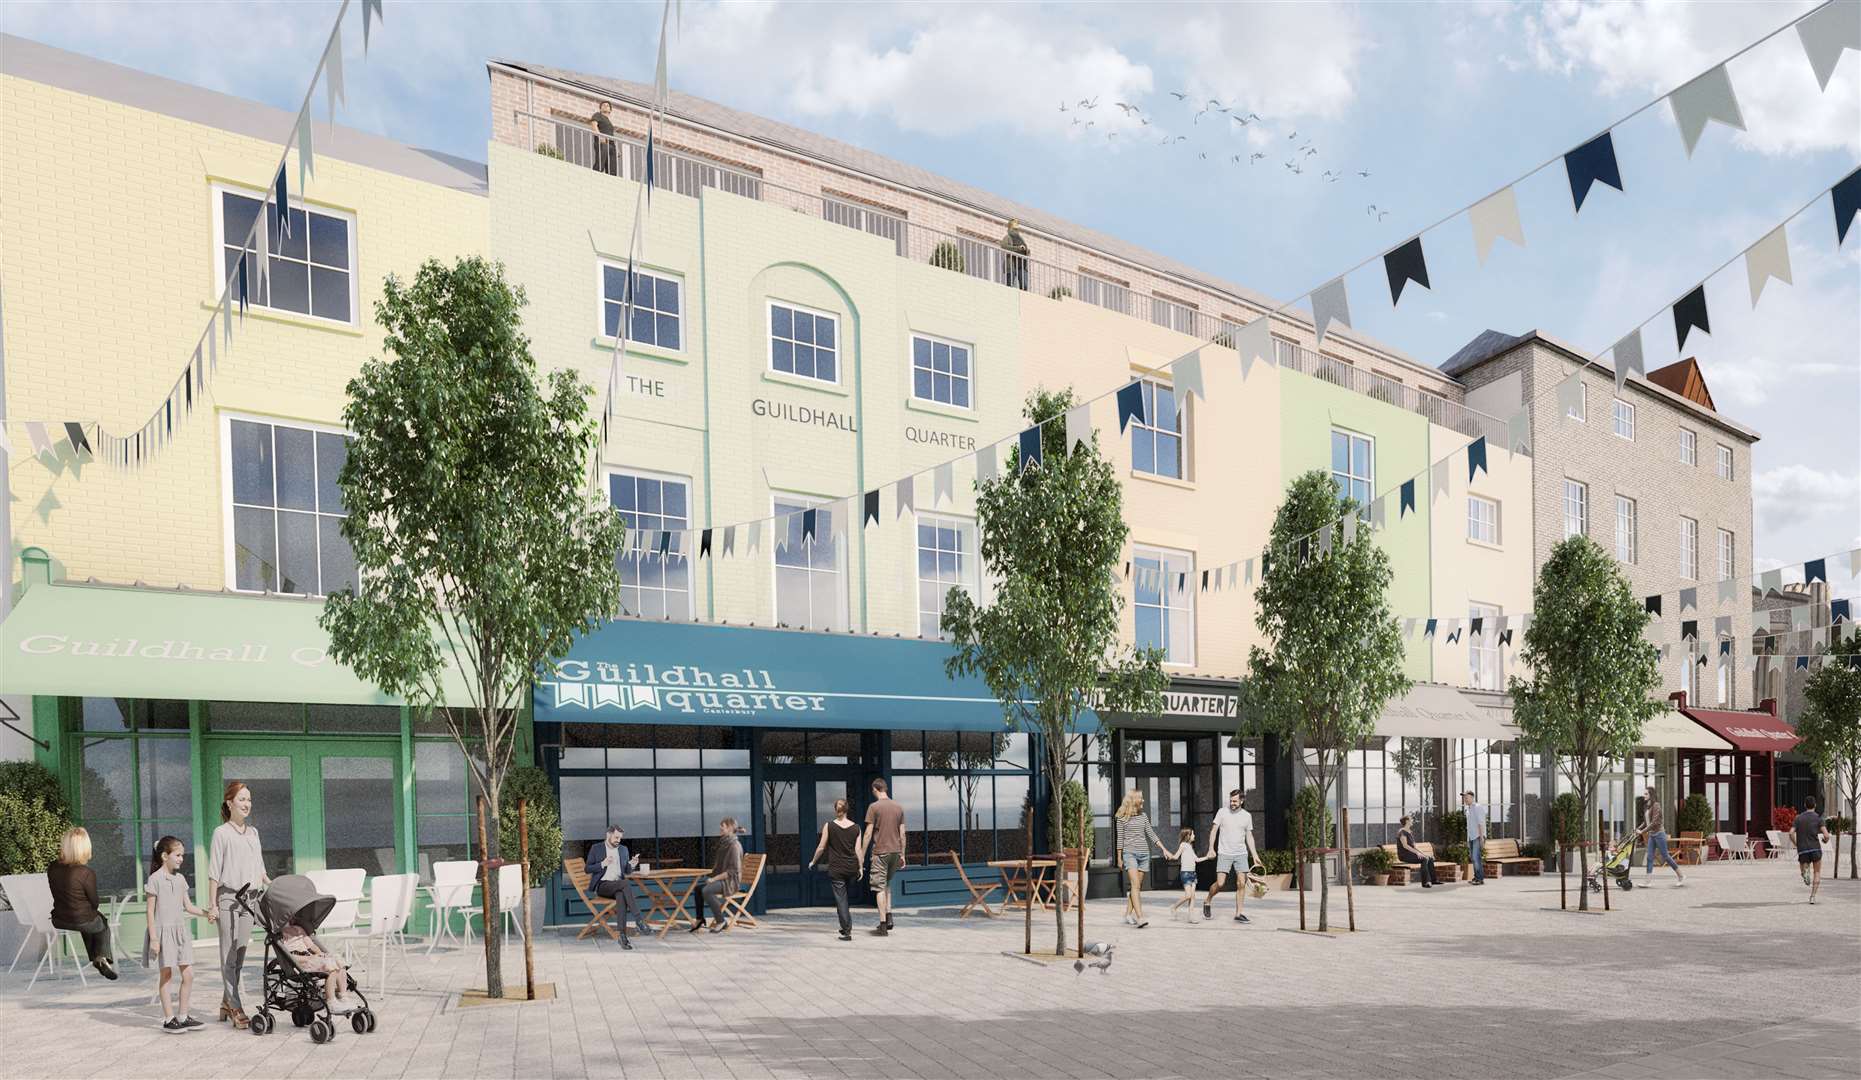 The vision for Debenhams in Guildhall Street